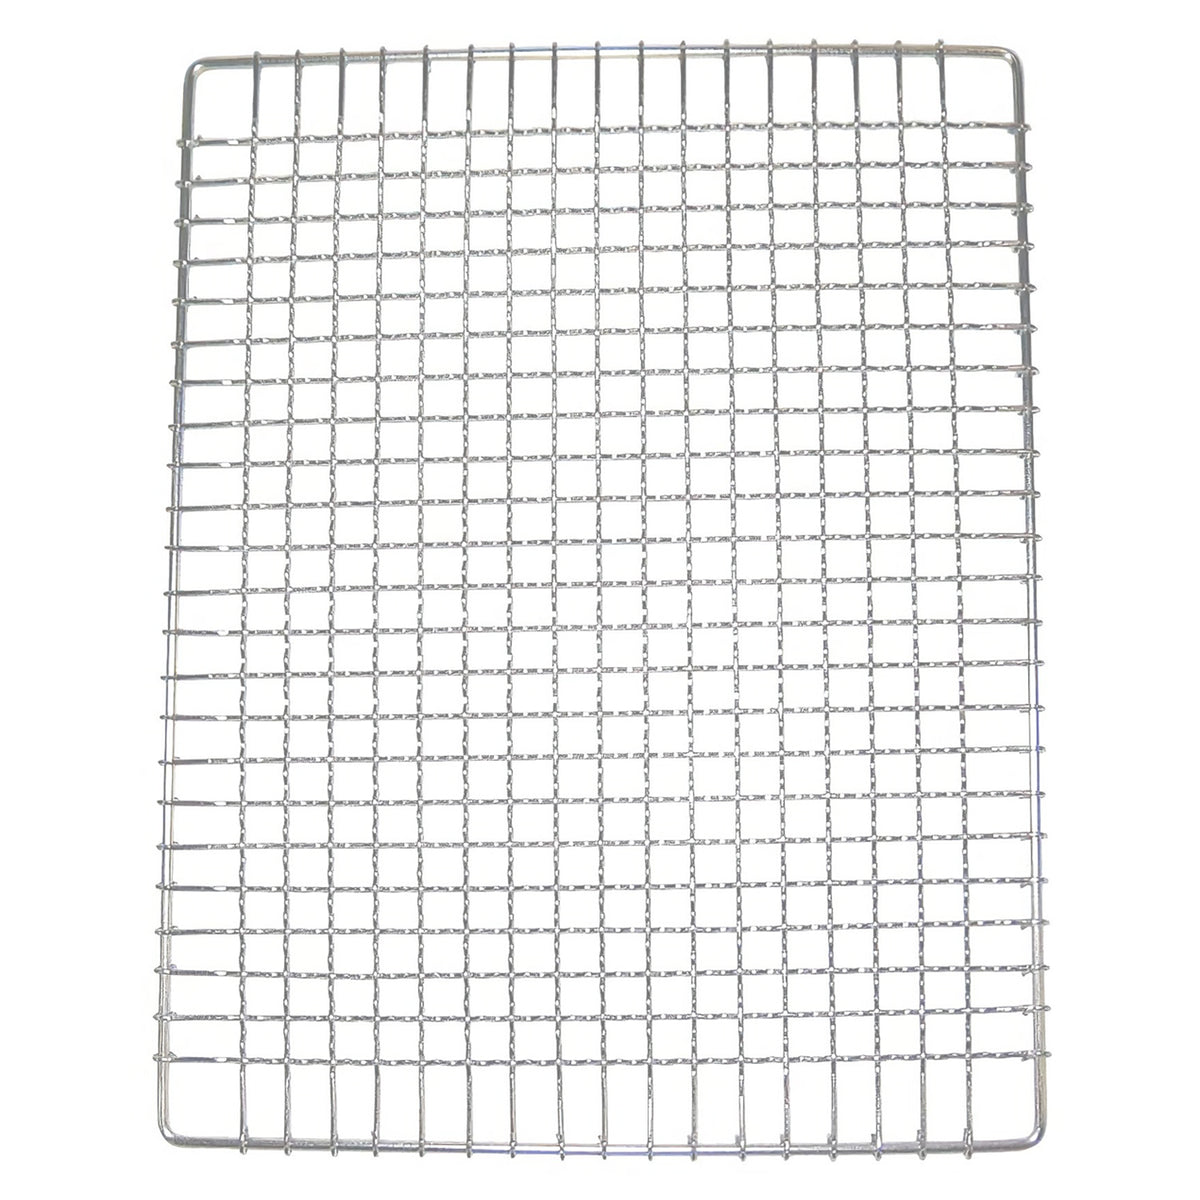 EBM Stainless Steel Barbecue Grill Mesh 27.5 x 21.5cm